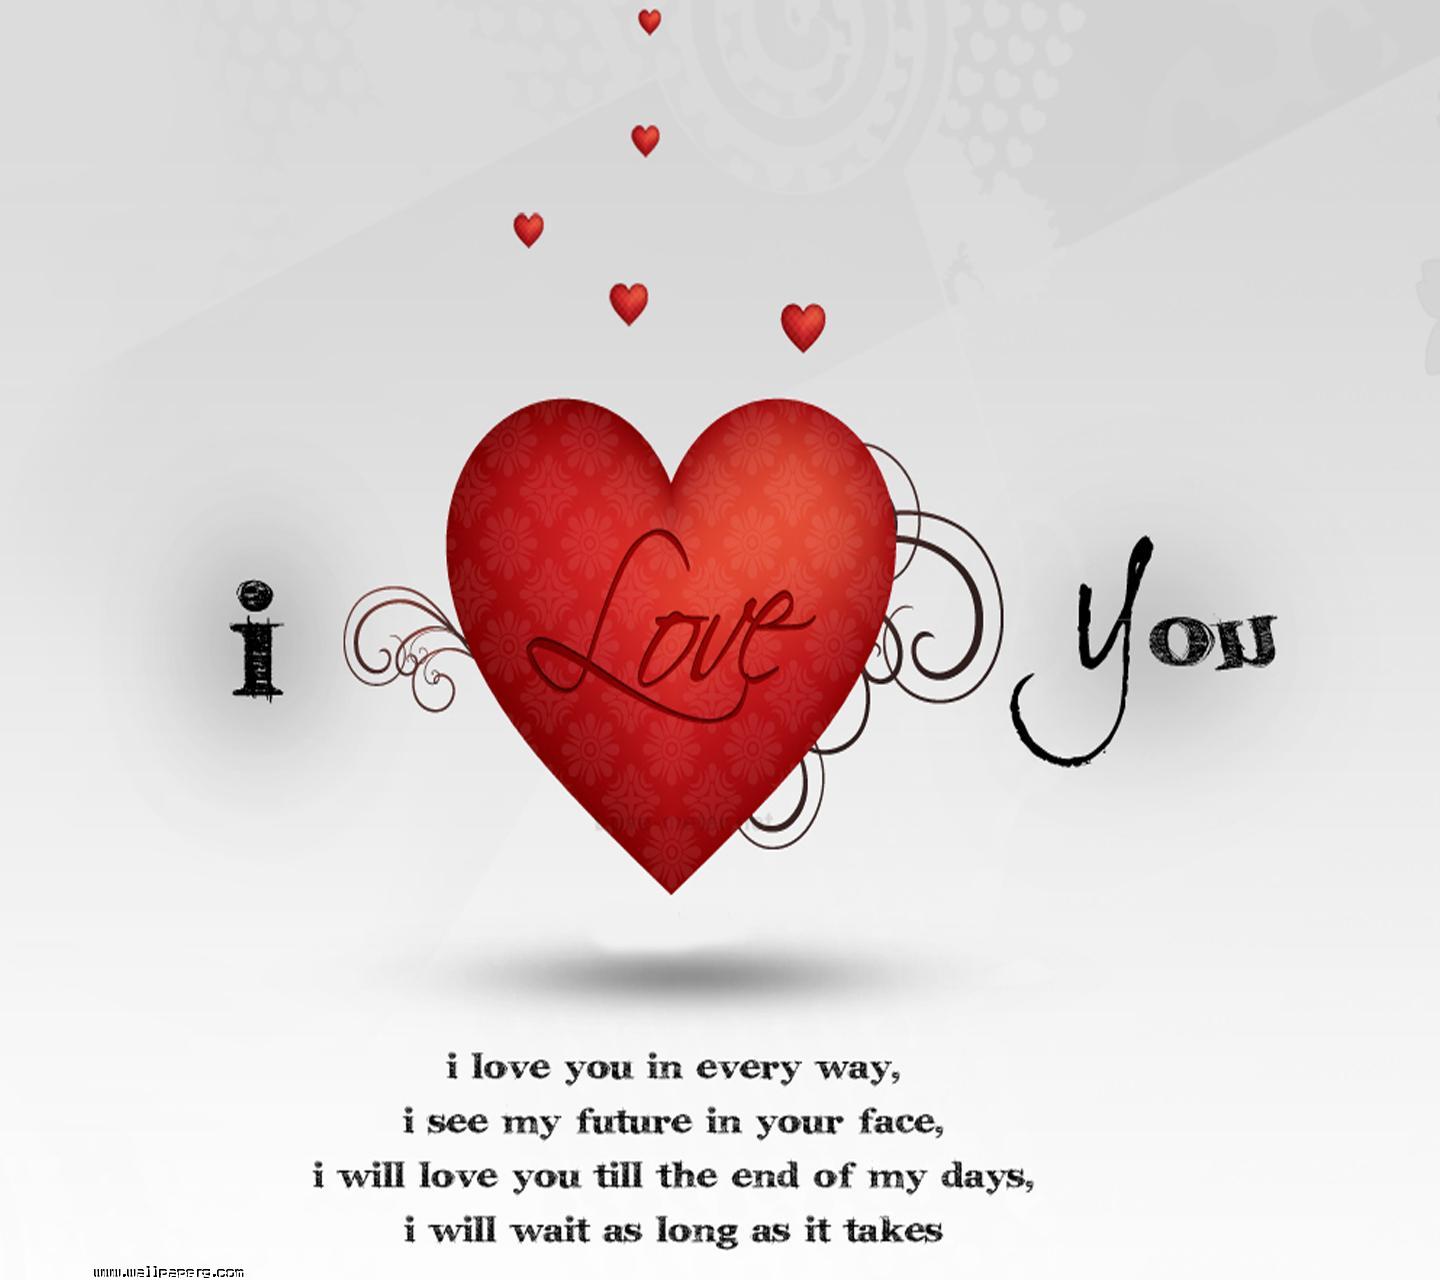 Download I love you(1) - Heart touching love quote Hd wallpaper or ...